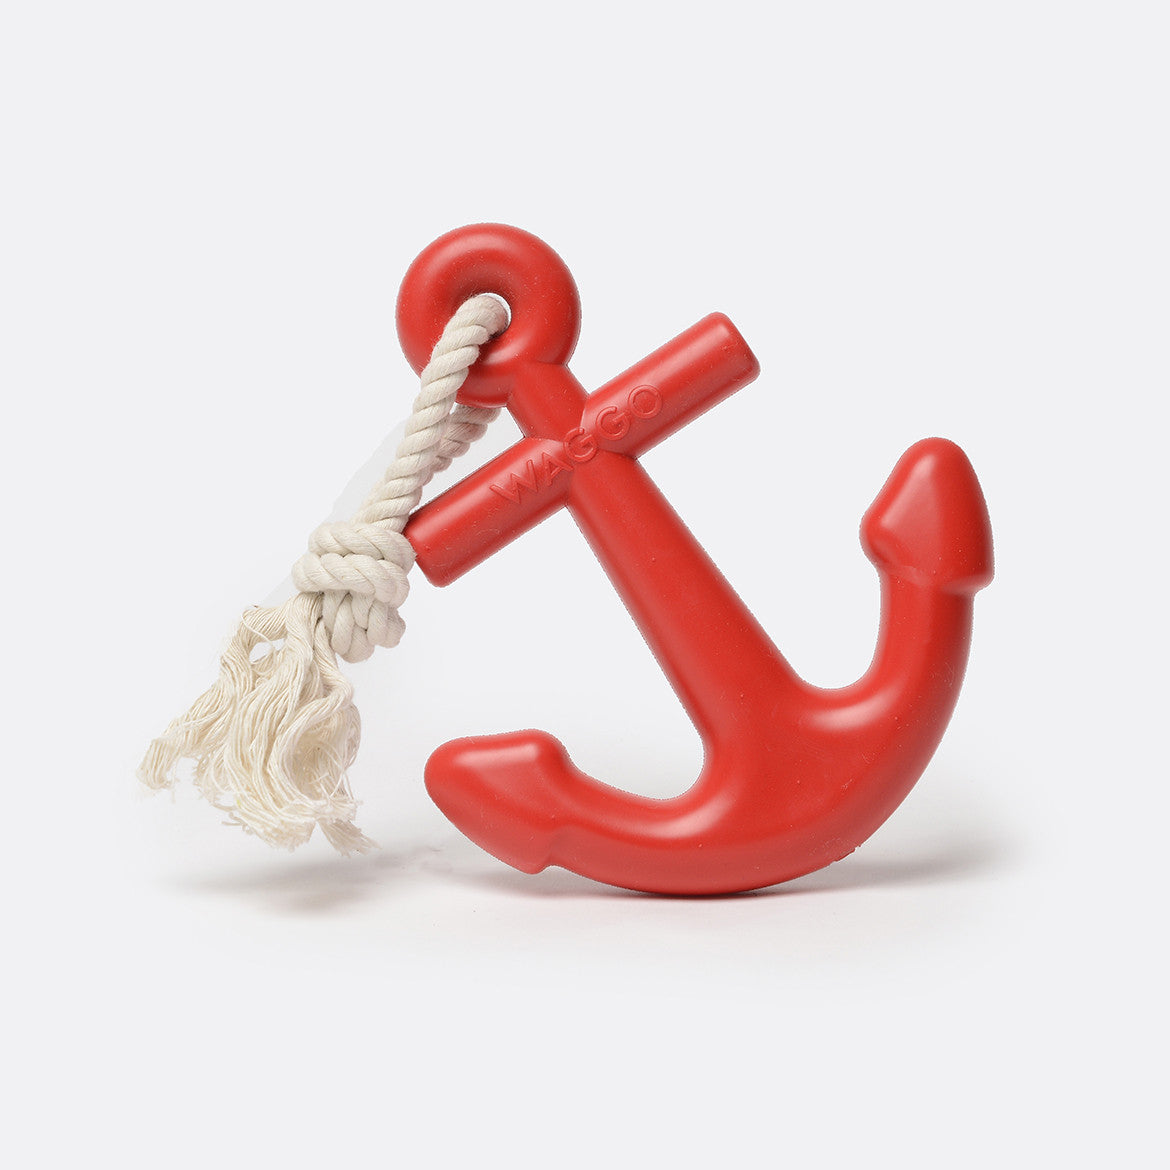 red rubber anchor dog chew toy with rope tug